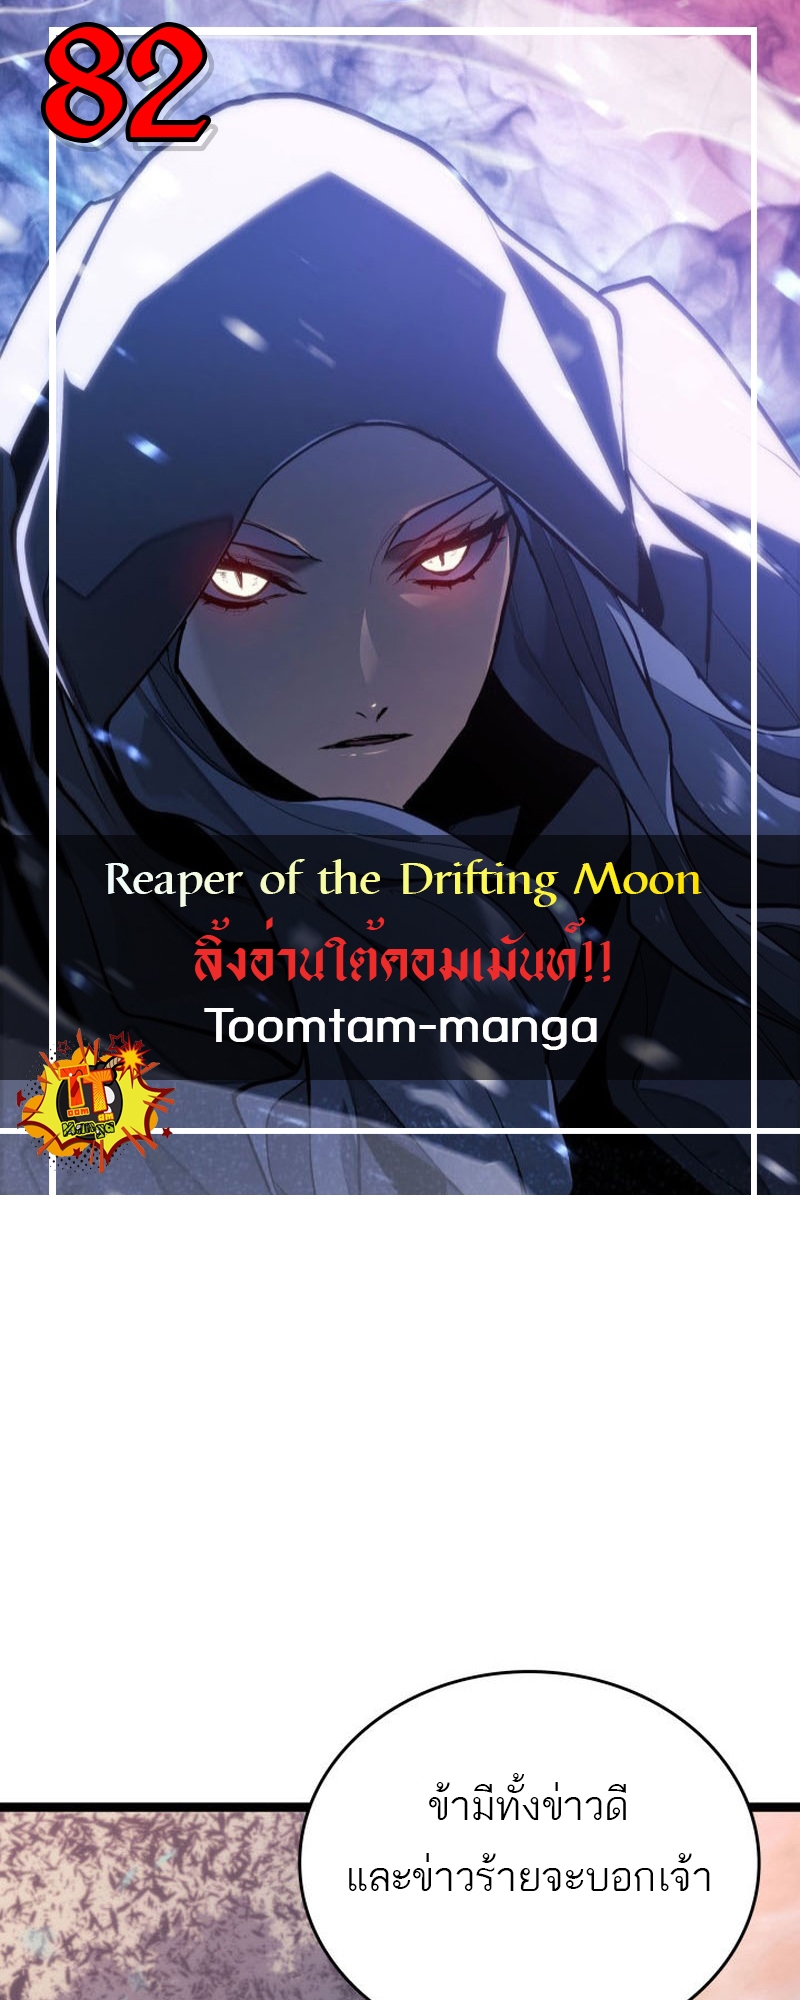 Reaper of the Drifting Moon 82 3 04 25670001